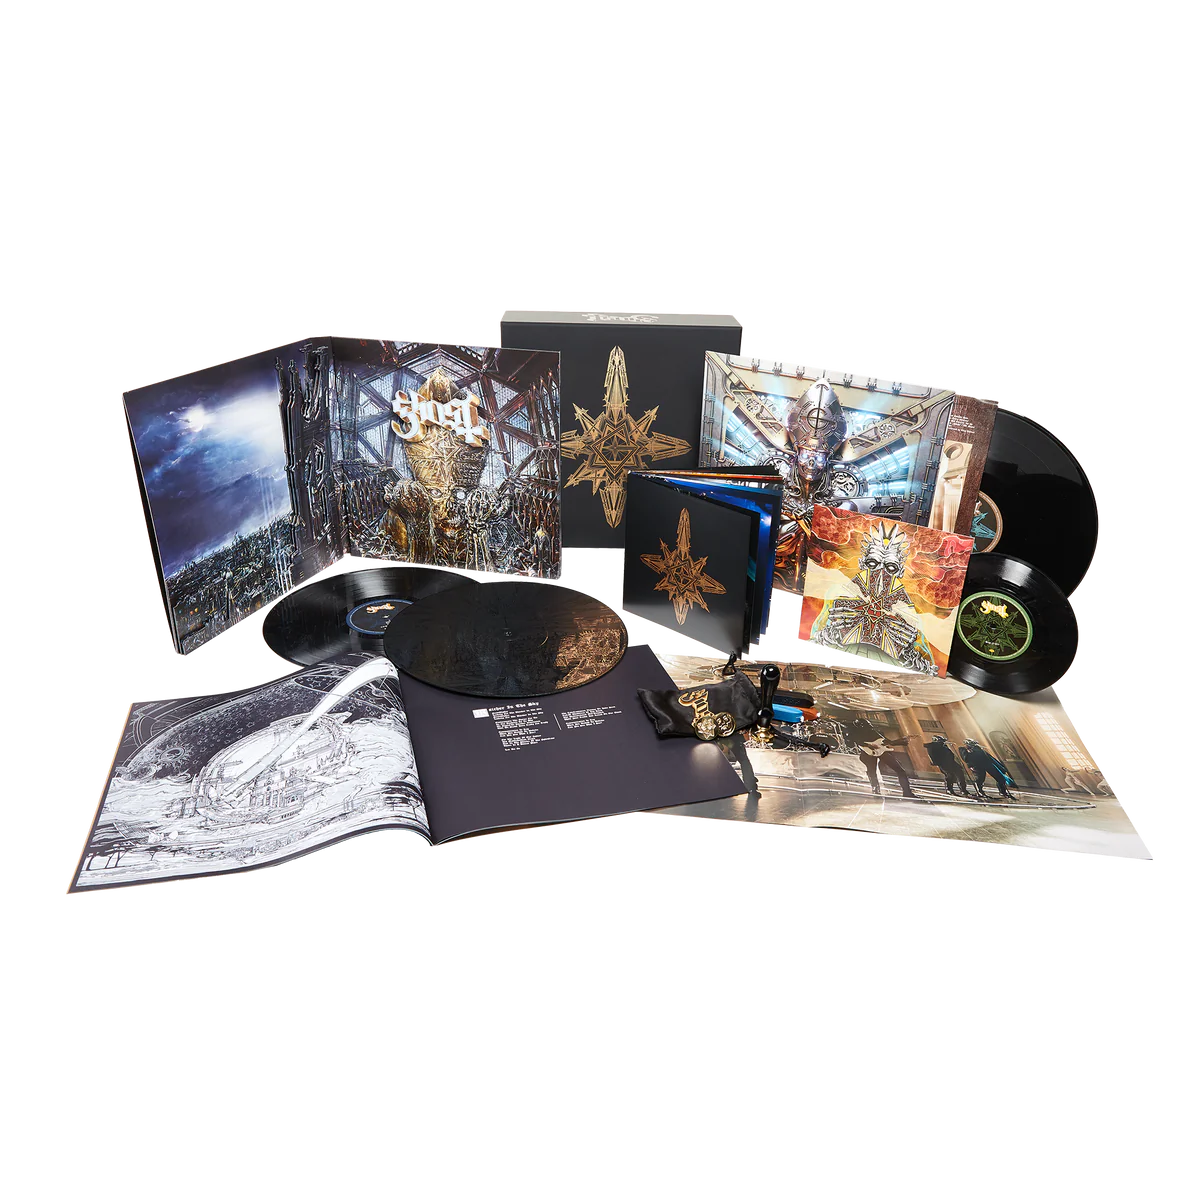 Ghost - Extended Impera: Limited Edition Deluxe Box Set